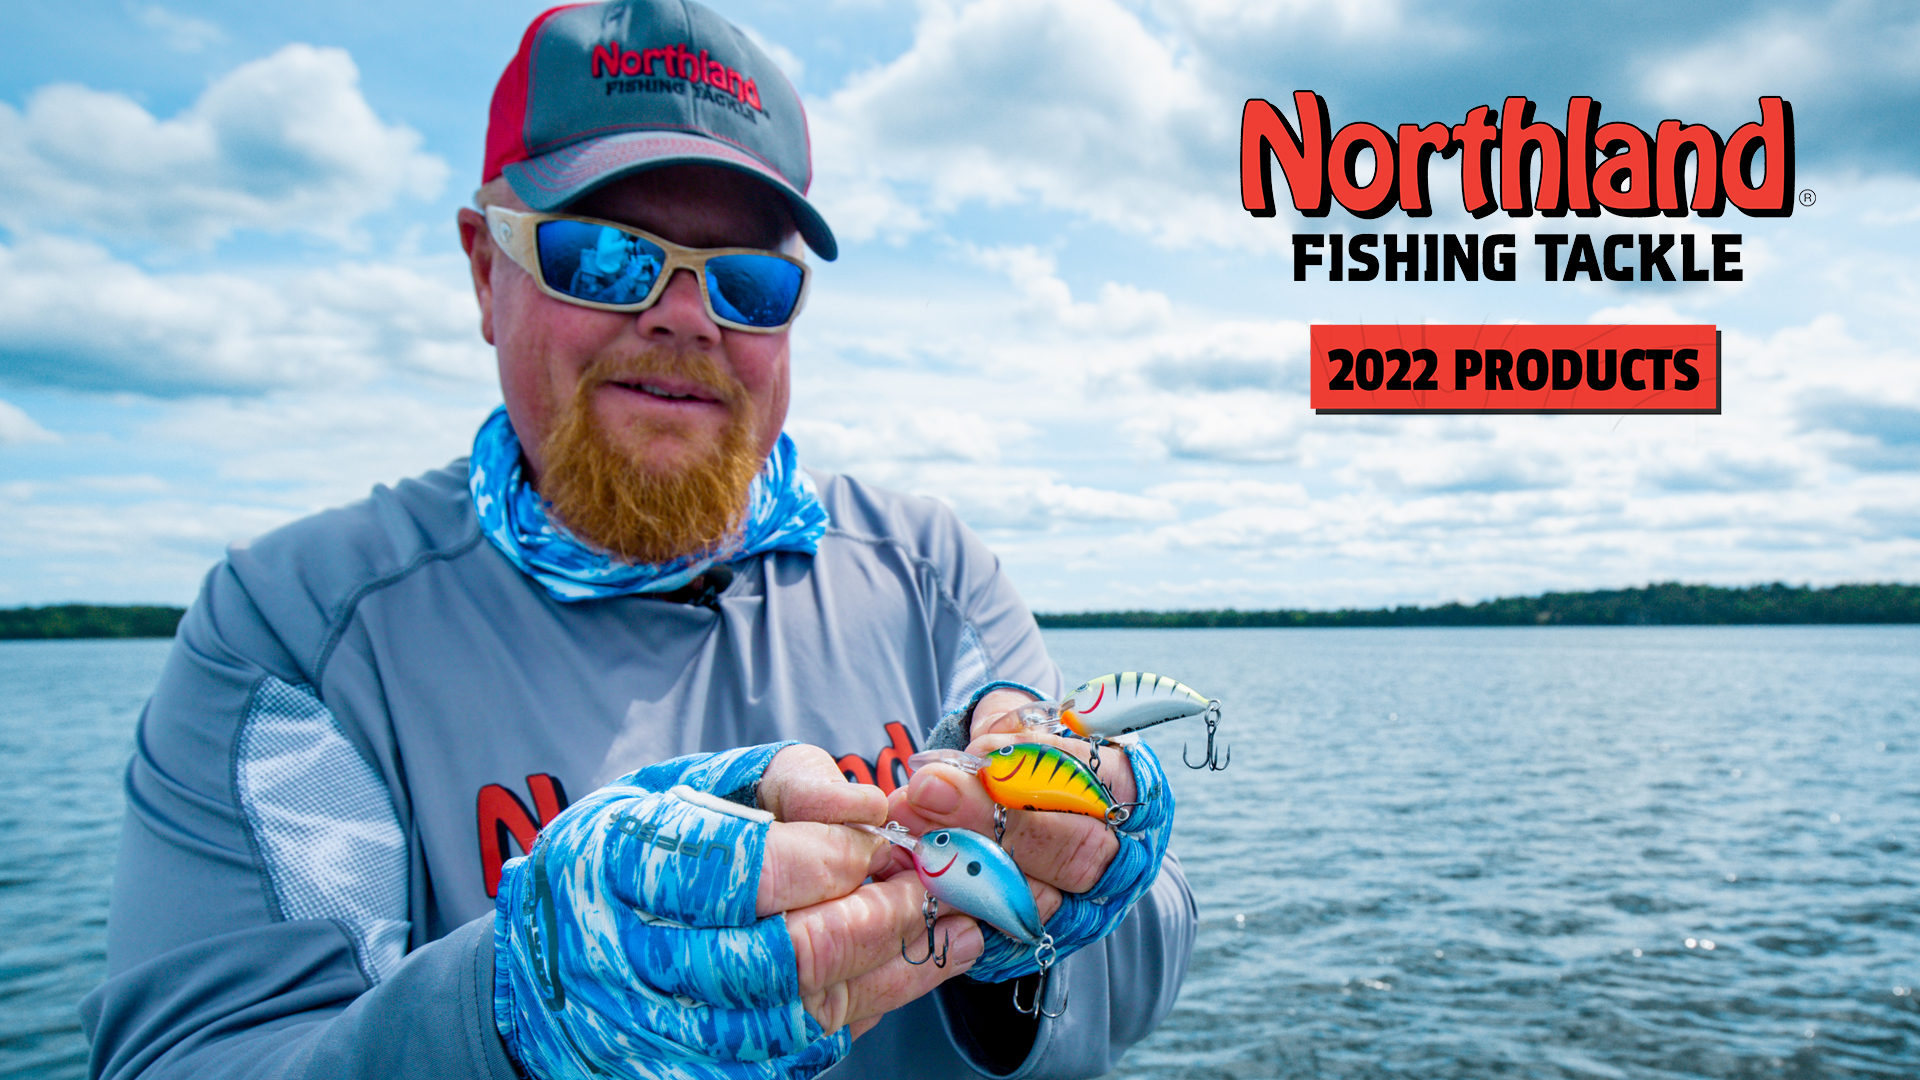 Northland Fishing Tackle - New Hats Available! #TeamNorthlandTackle shop .northlandtackle.com/clothing/hats/